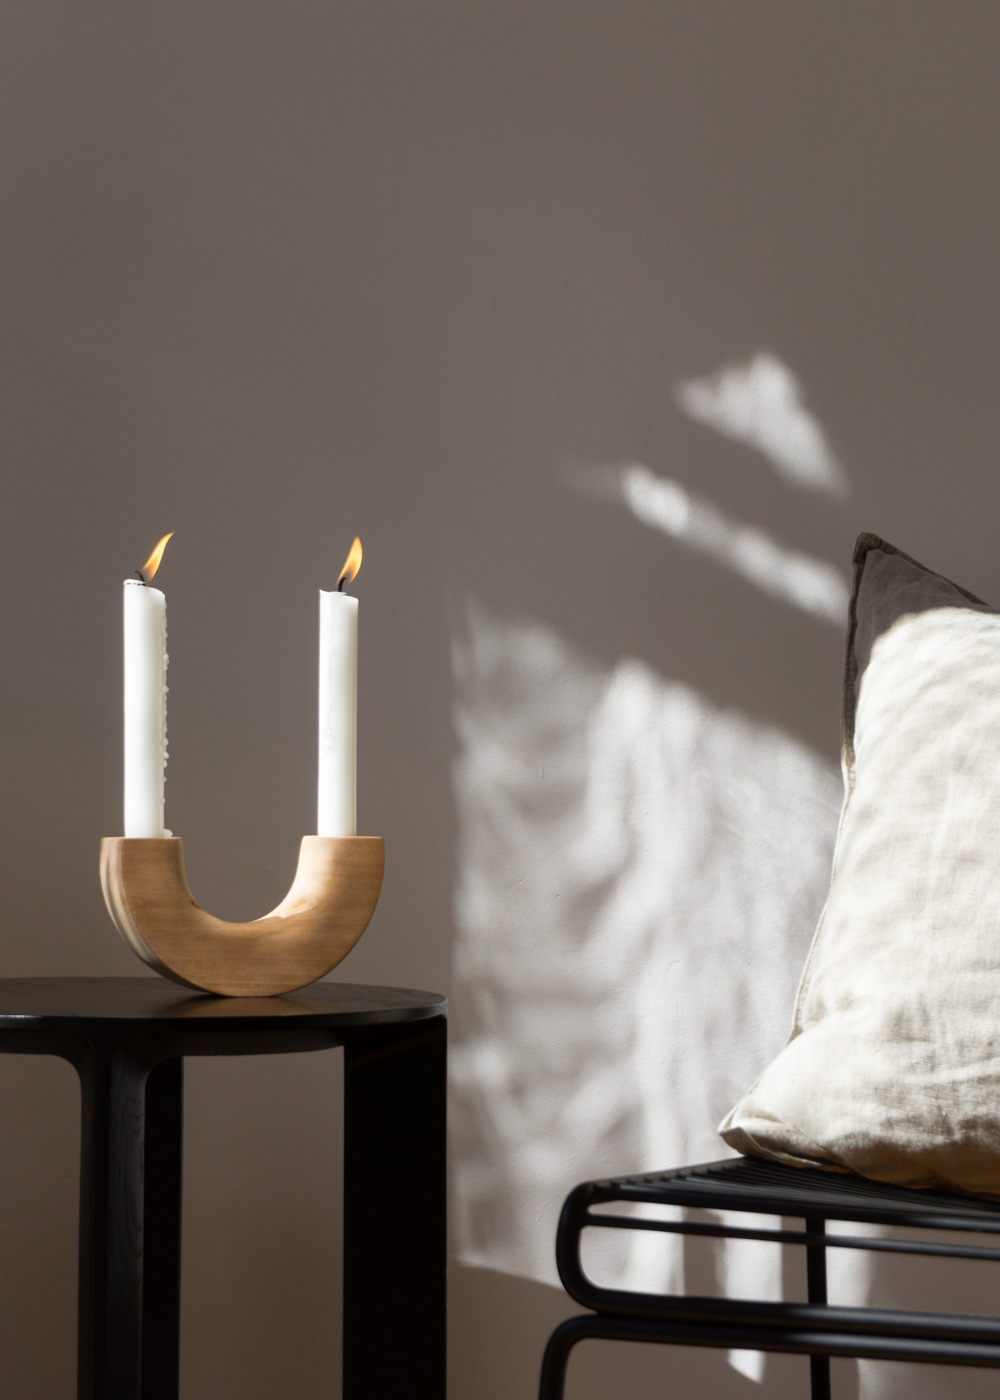 Foresta Arco Candle Holder, Hay Hee Lounge Chair ~ Table Setting, Slow Living, Simple For Everyday, Ethical Sustainable Brand, Fair Trade Design | Minimalist Home, Scandinavian Design, Sustainable Home, Natural Aesthetic | Product Photography, Light and Shadows, Danish Design Interior | RG Daily Blog